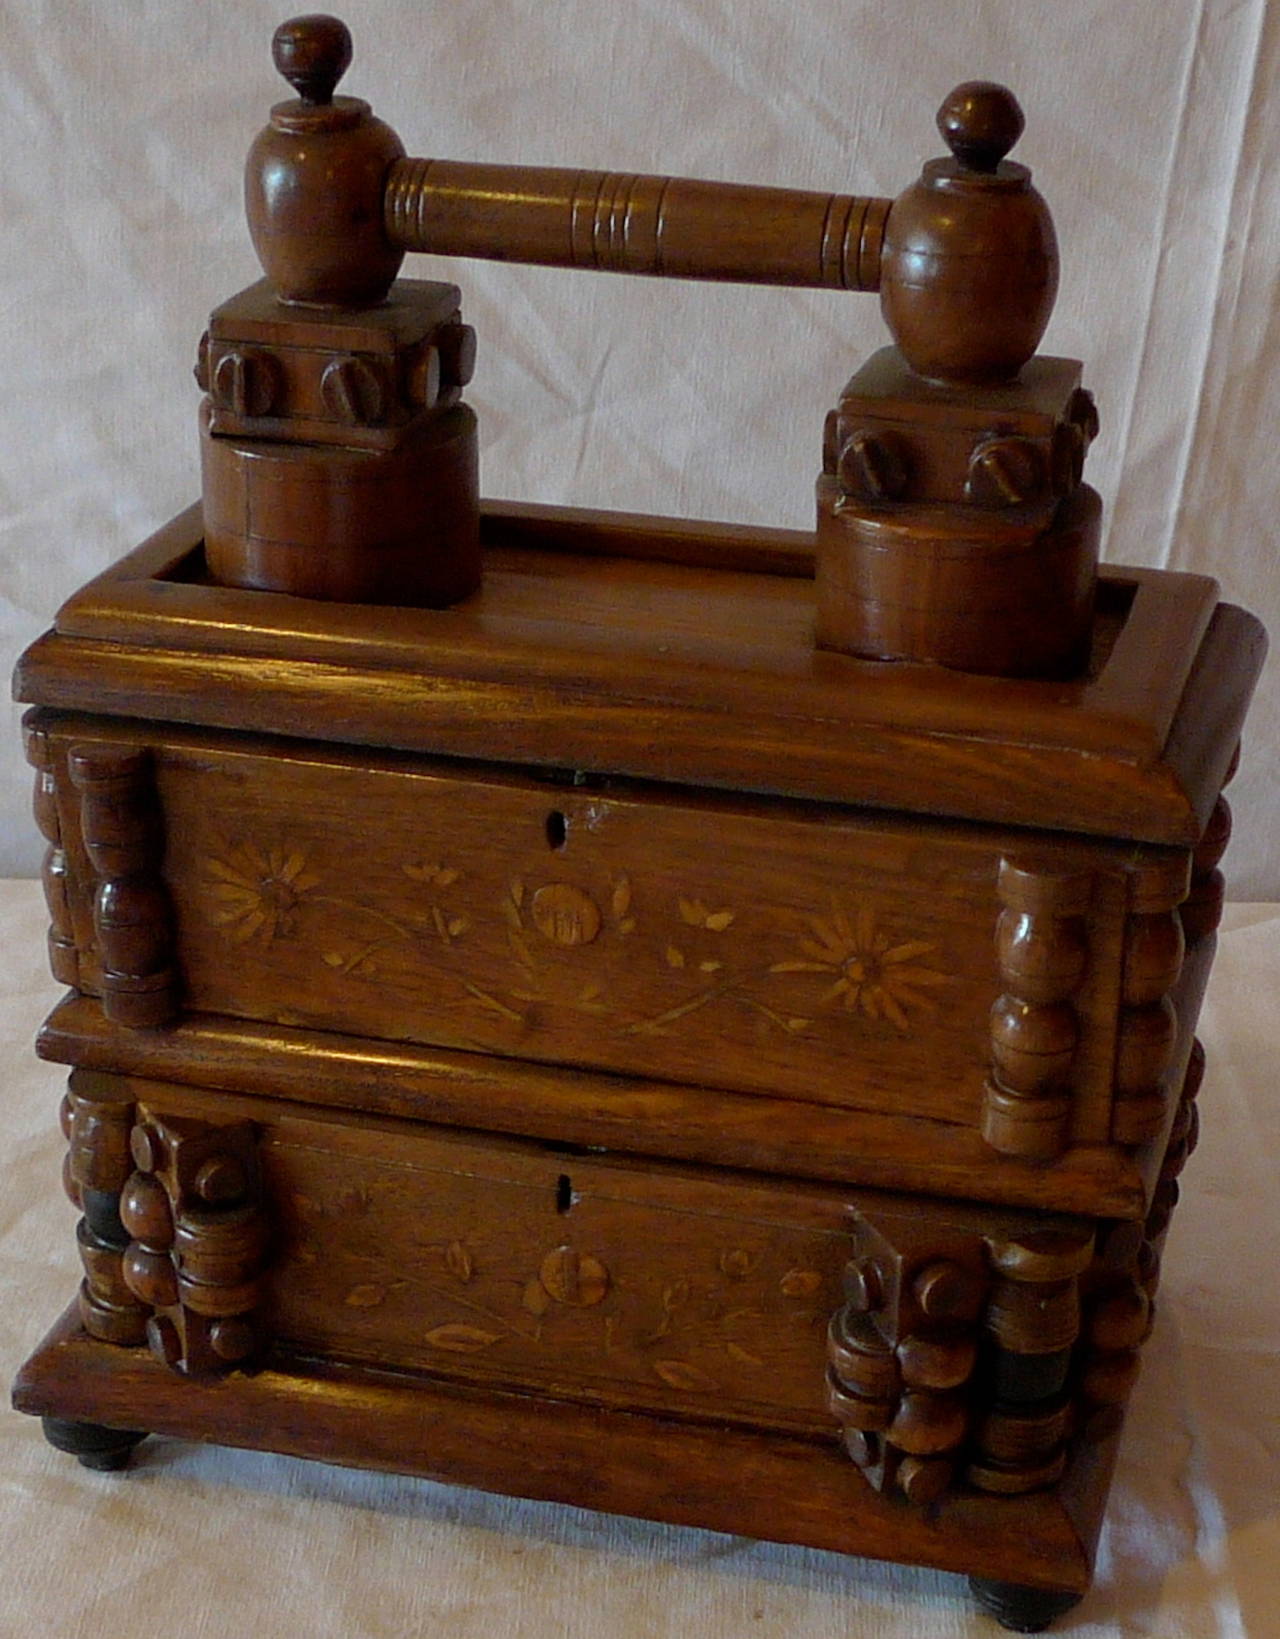 French early 20th century Tramp Art carved and stained walnut double jewelry box.